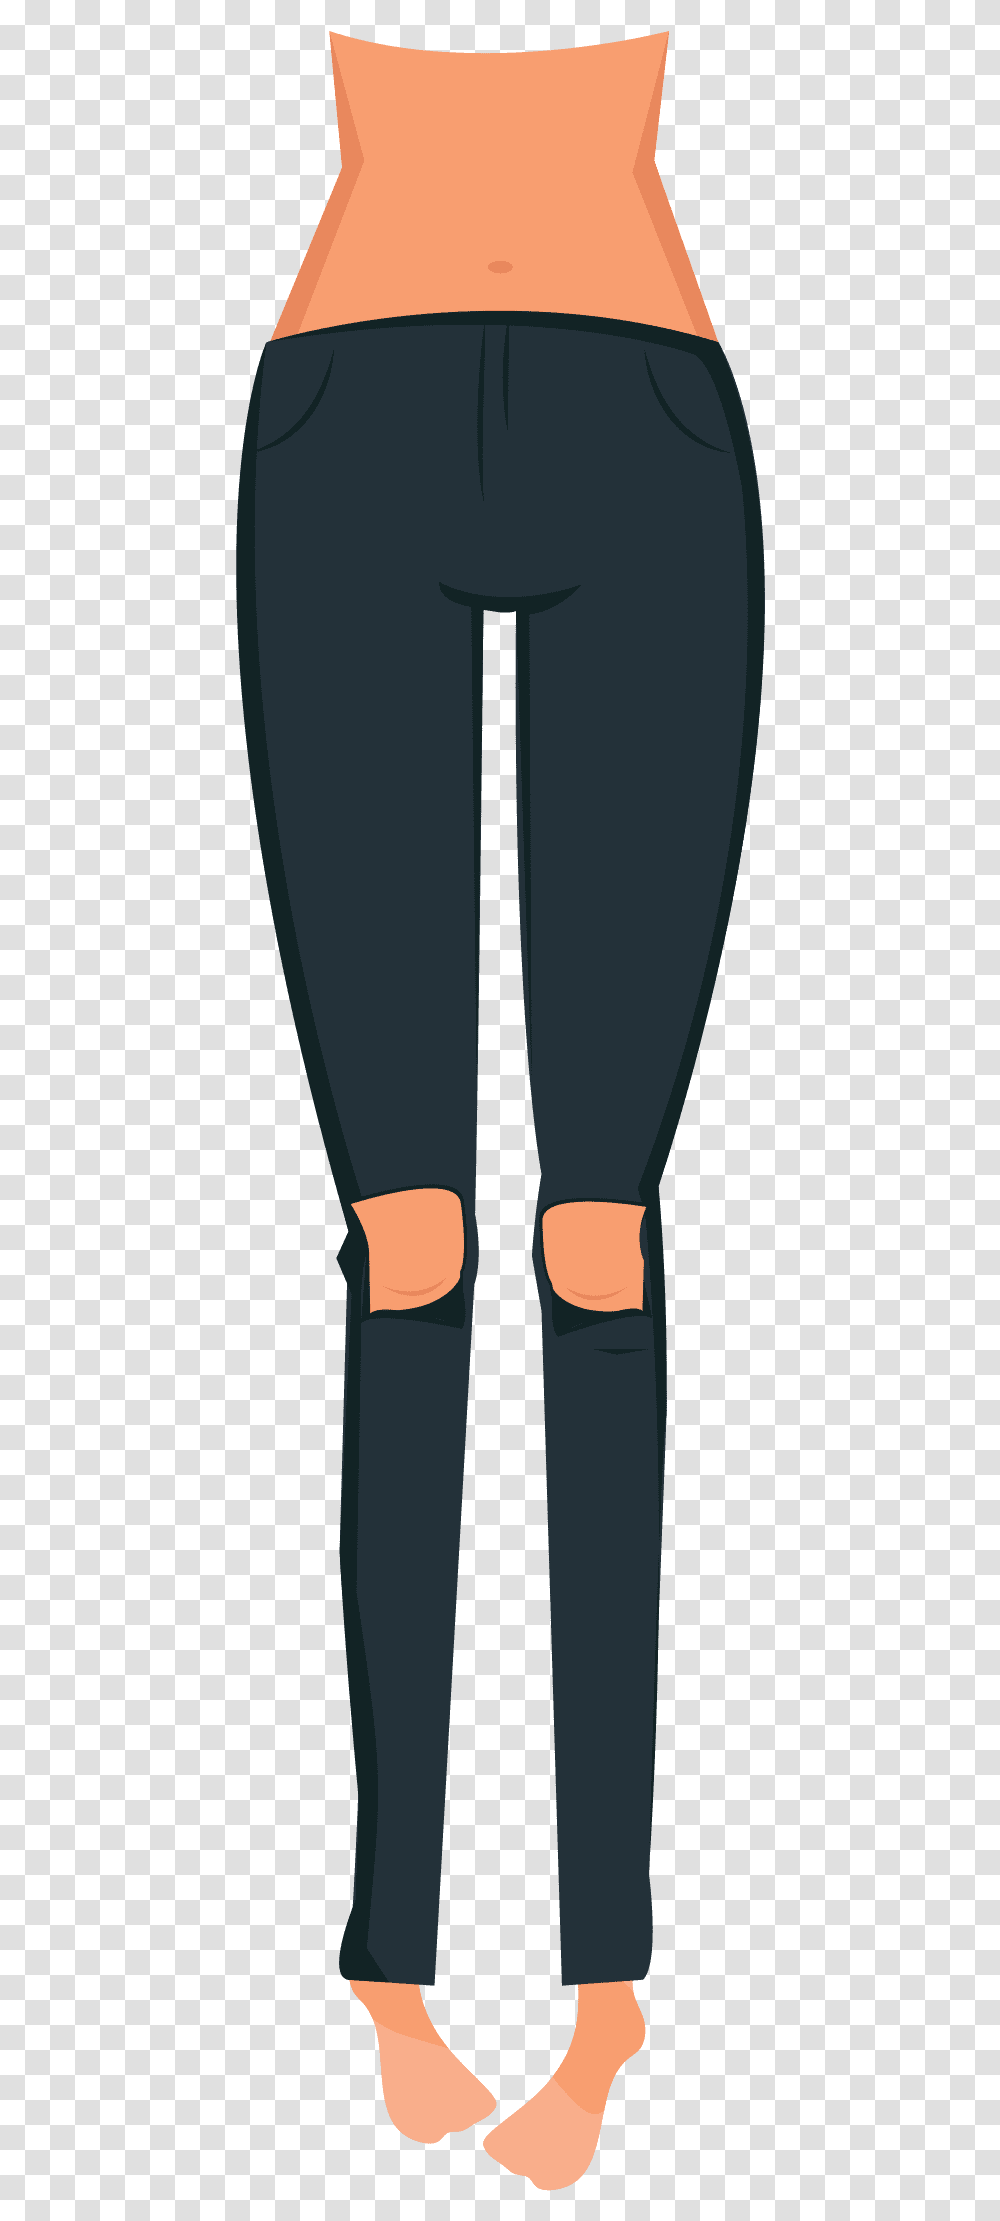 Tights, Pants, Cutlery, Texture Transparent Png